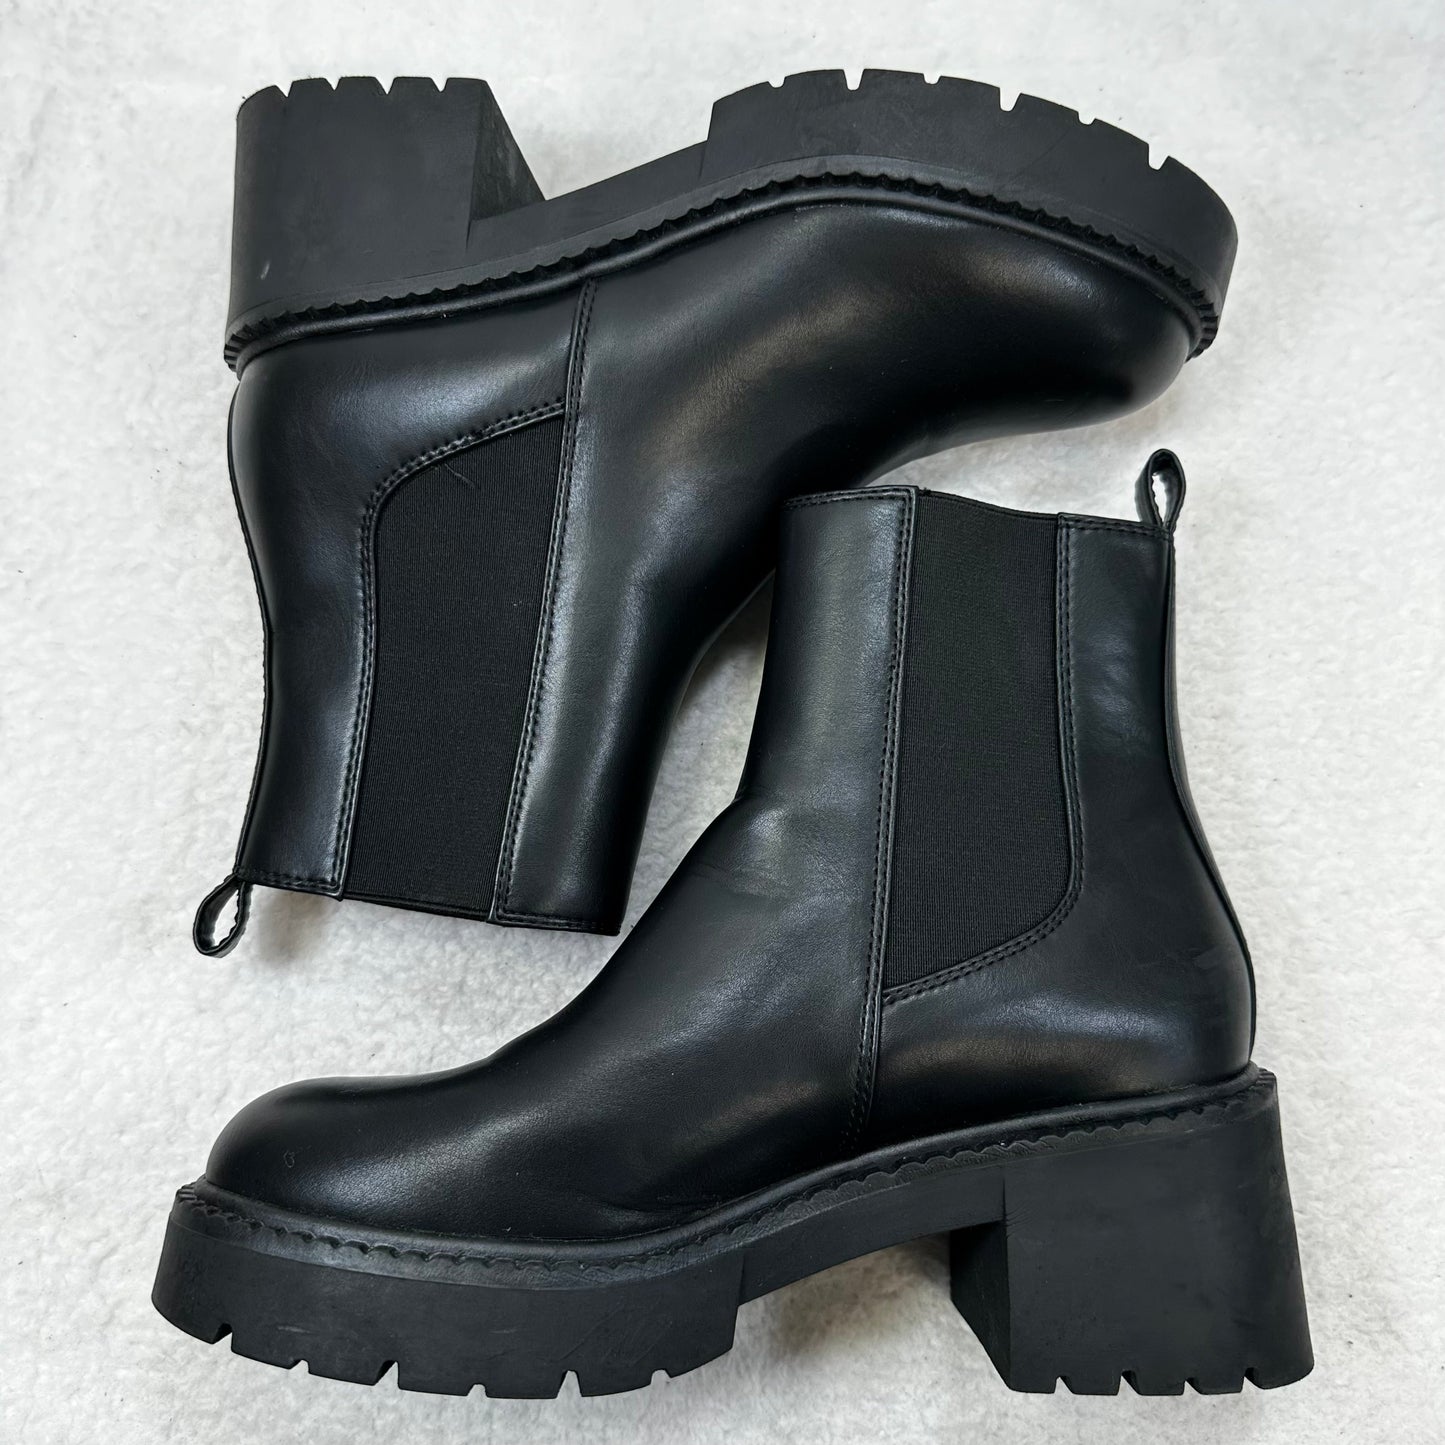 Black Boots Ankle Heels Madden Girl, Size 9